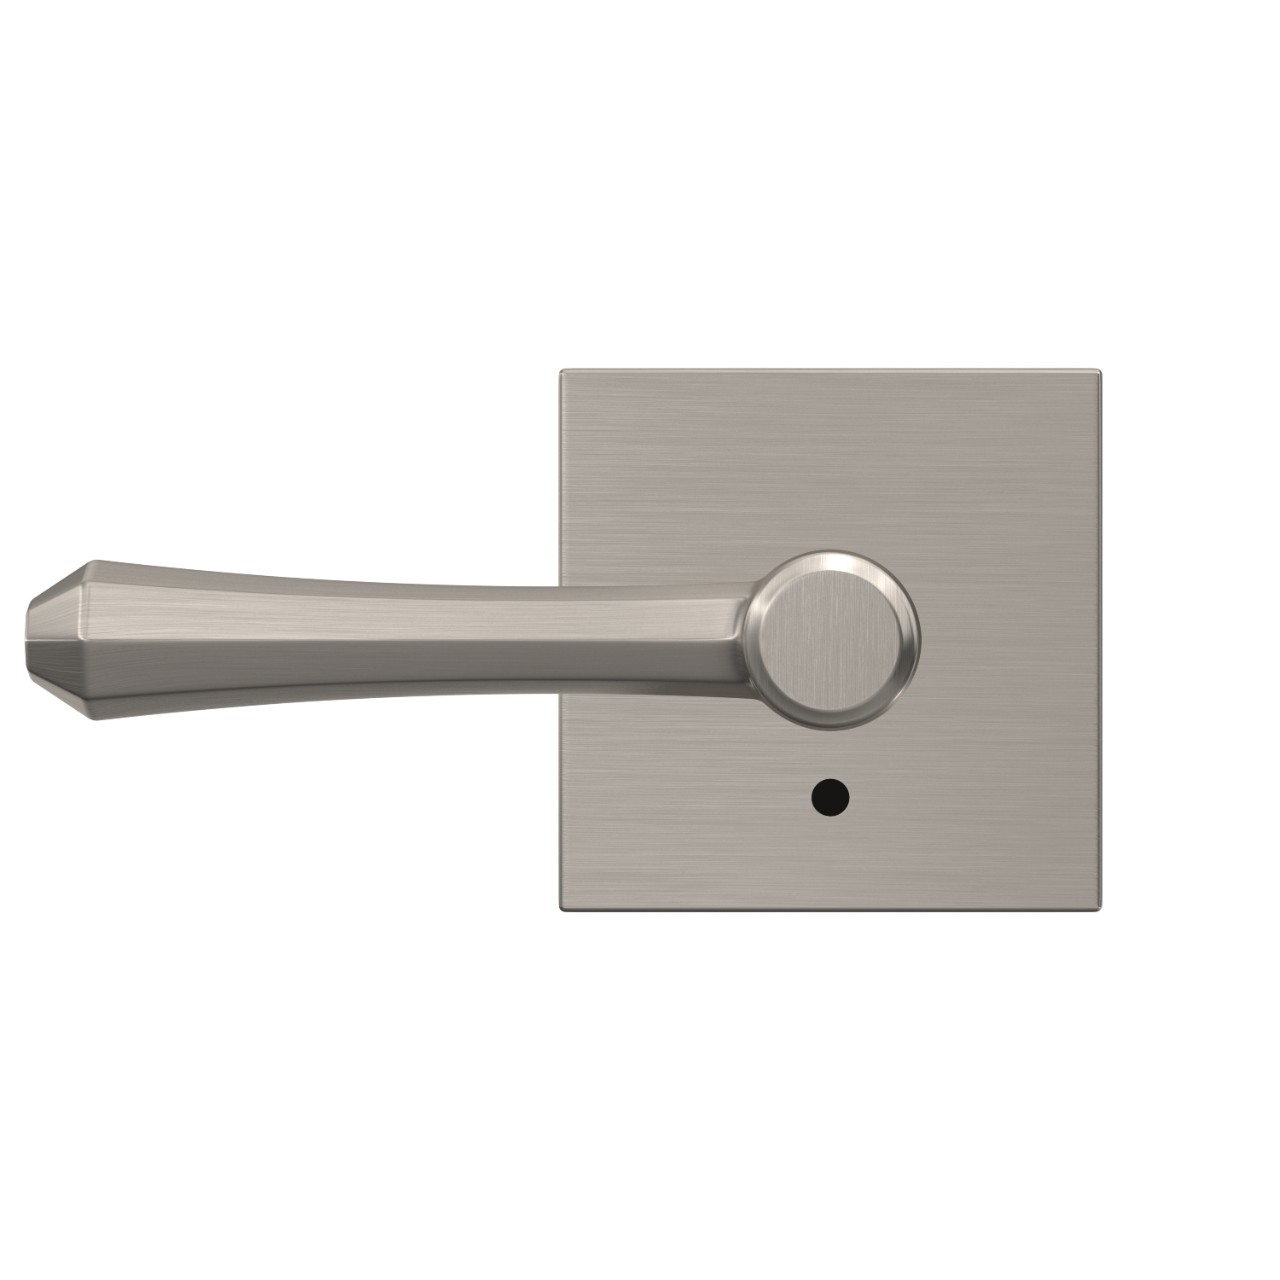 Custom Dempsey Lever Combined Interior Hall-Closet and Bed-Bath Lock